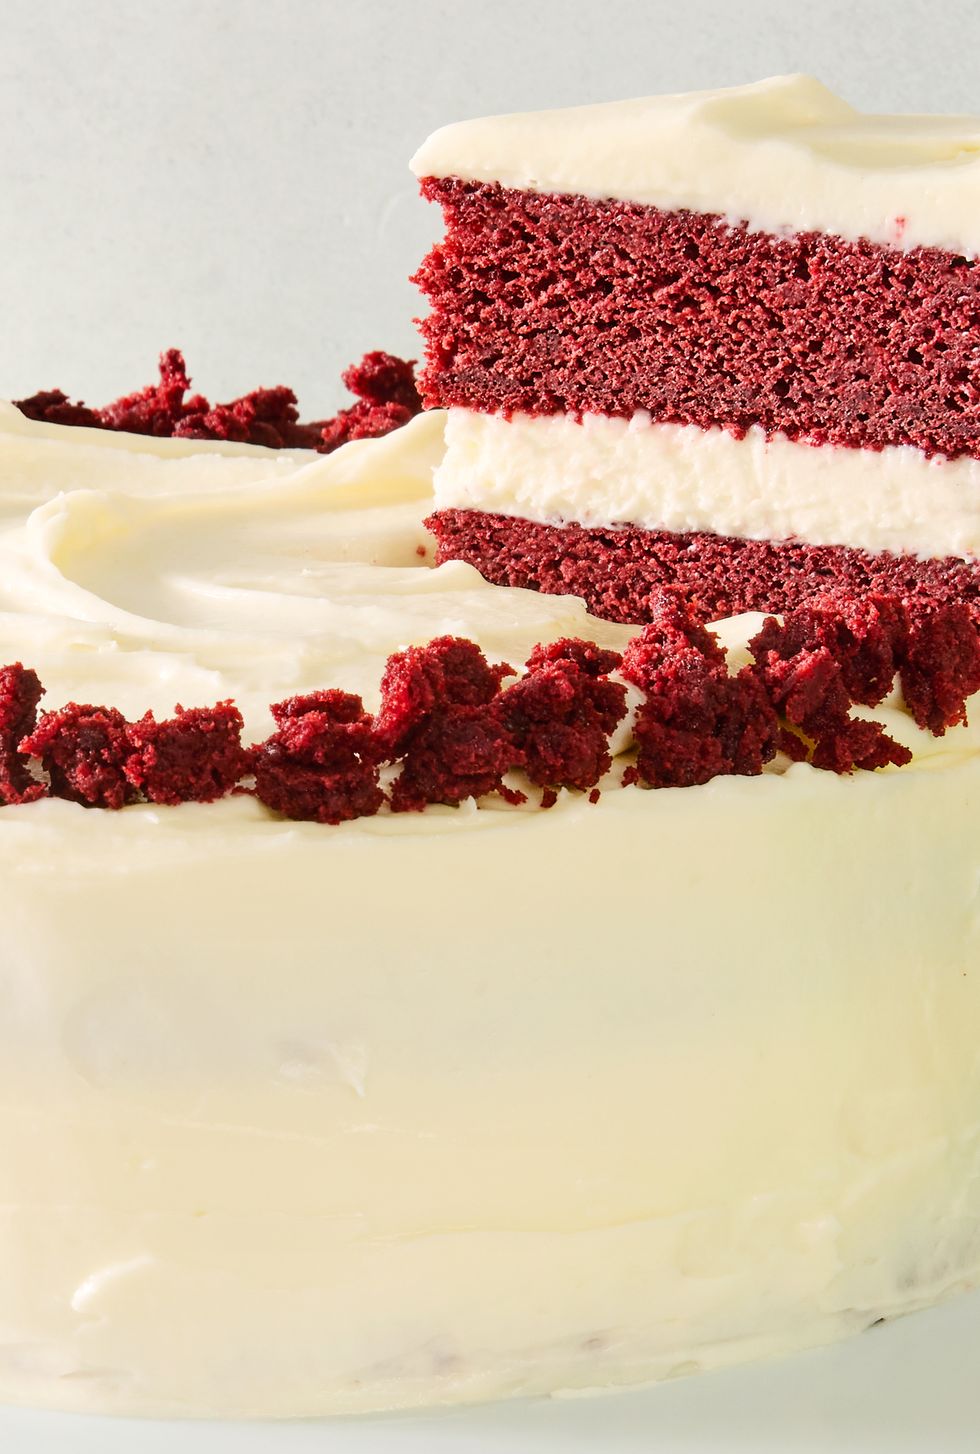 layered red velvet cake with cream cheese icing and pieces of cake